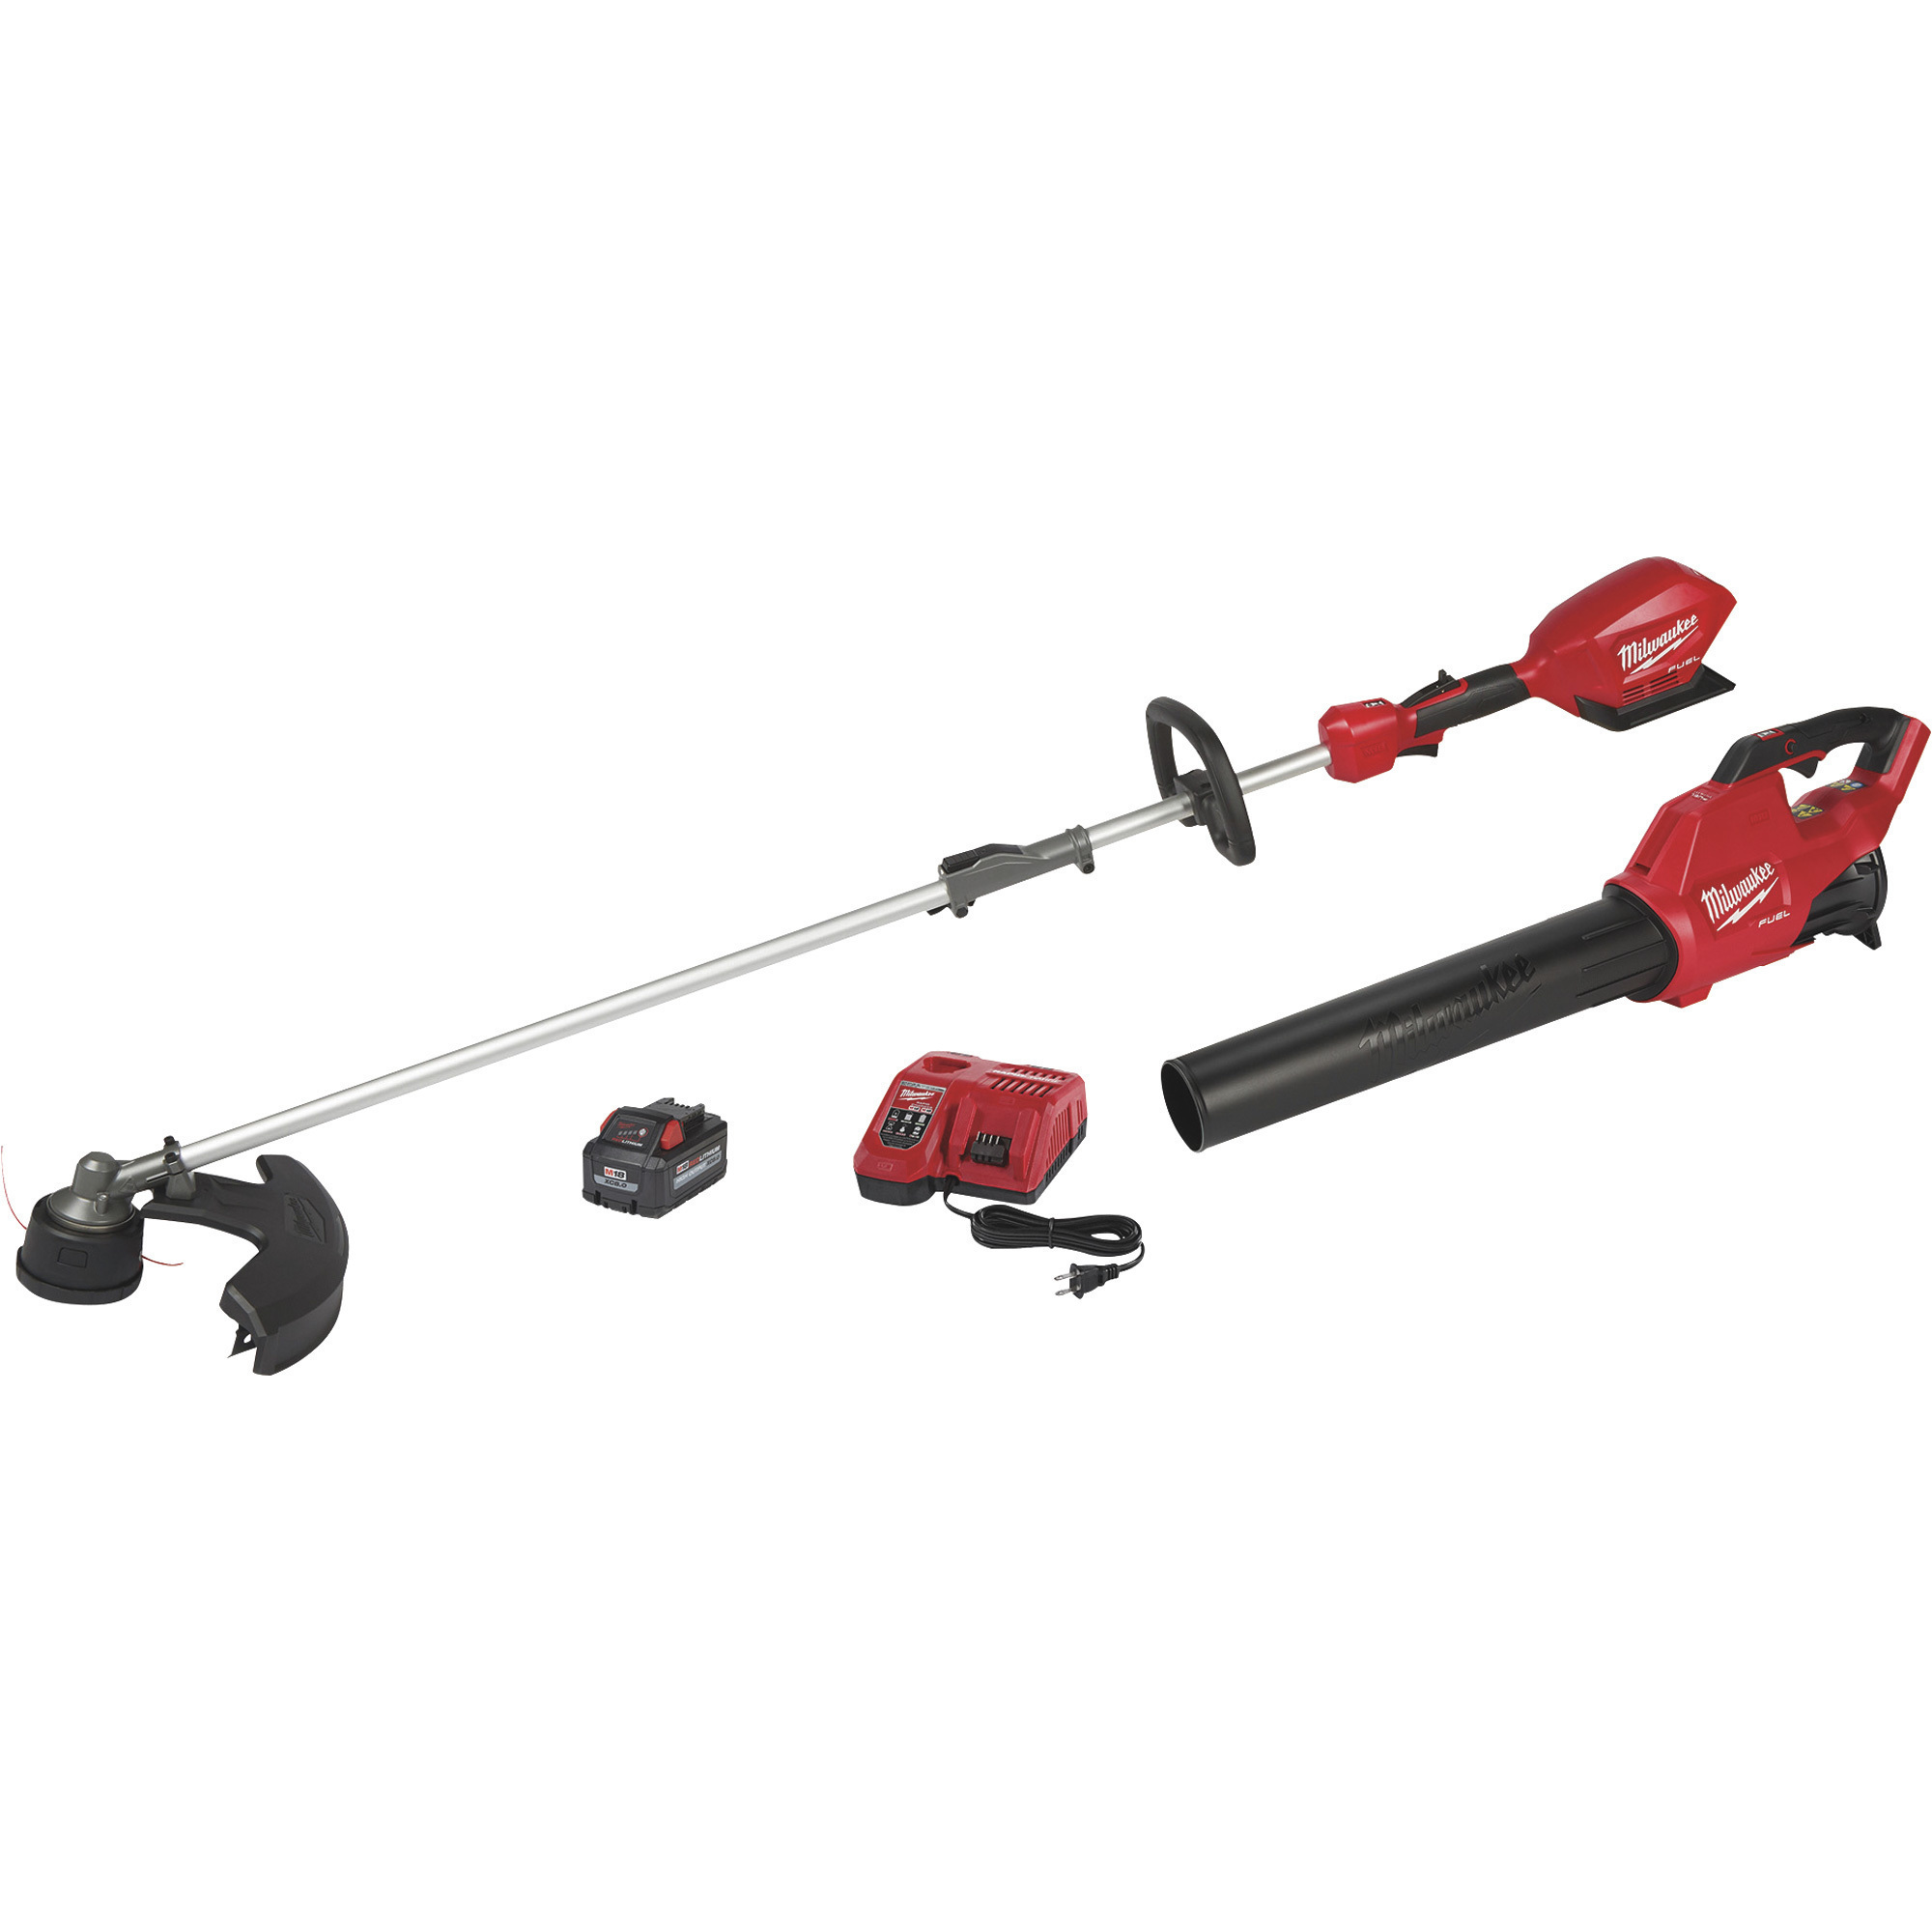 Milwaukee M18 FUEL 2-Tool Cordless String Trimmer/Blower Combo Kit, Complete 18V Lithium-Ion System, Model 3000-21